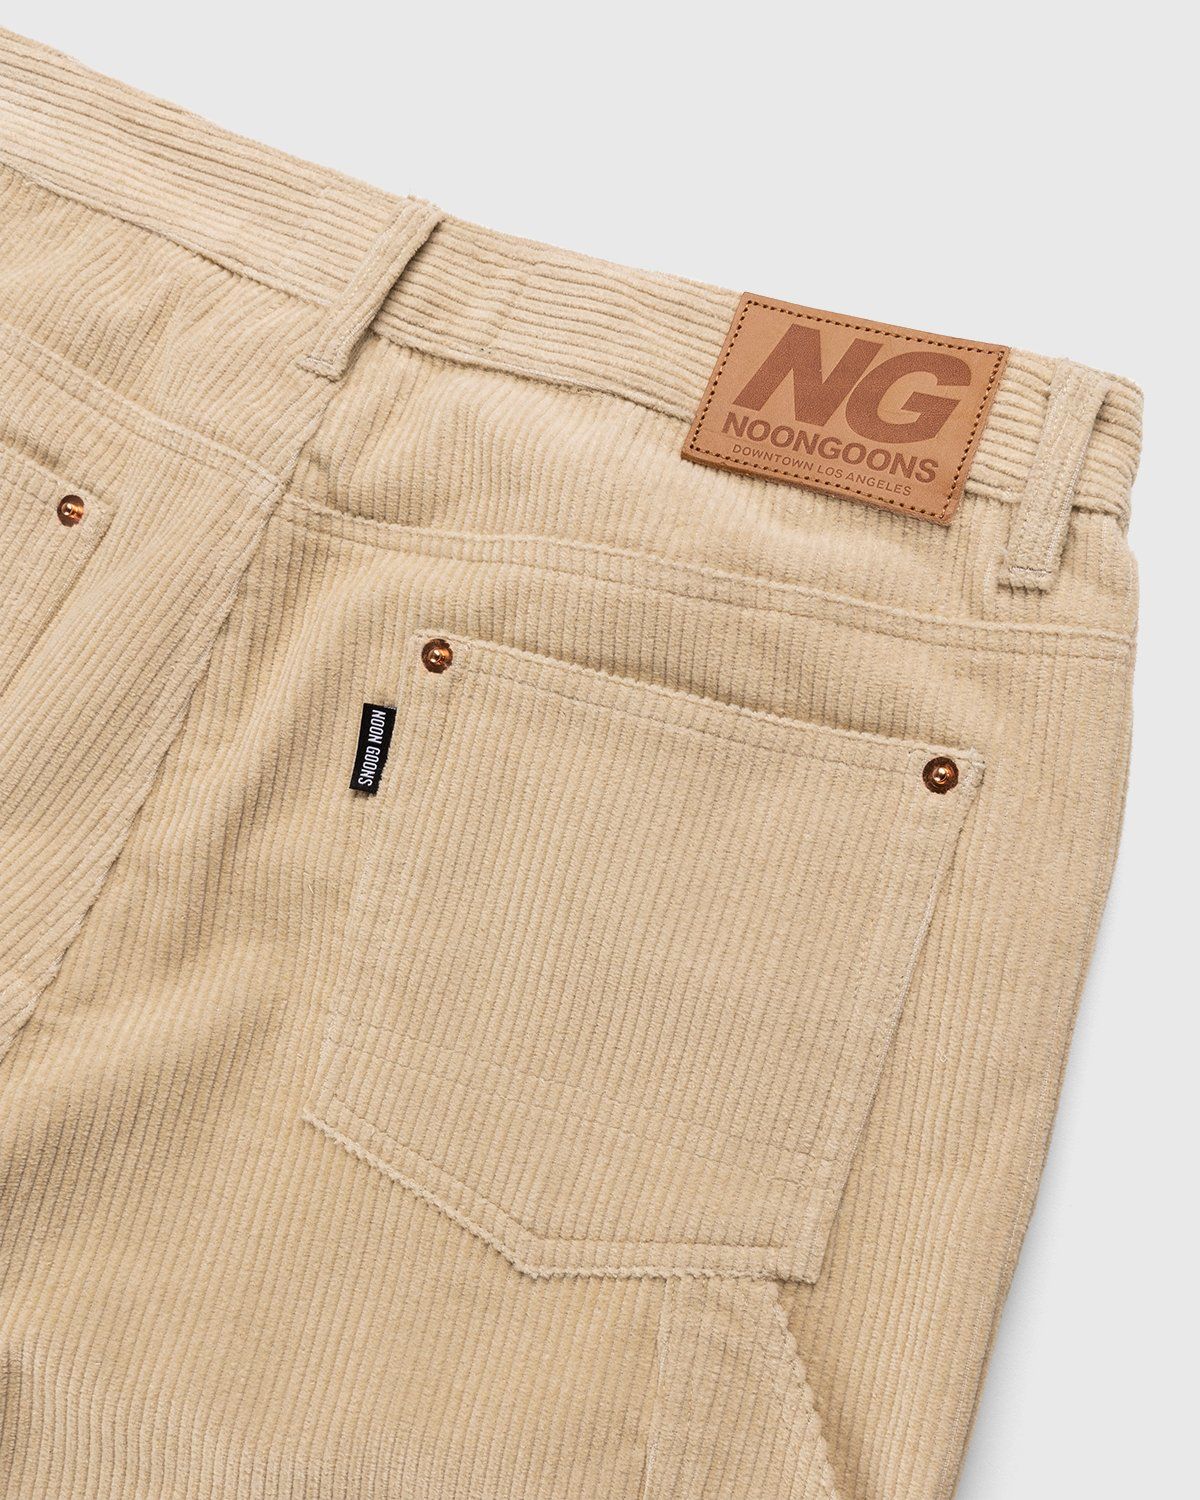 Noon Goons – Sublime Cord Short Overcast - Bermuda Cuts - Beige - Image 6